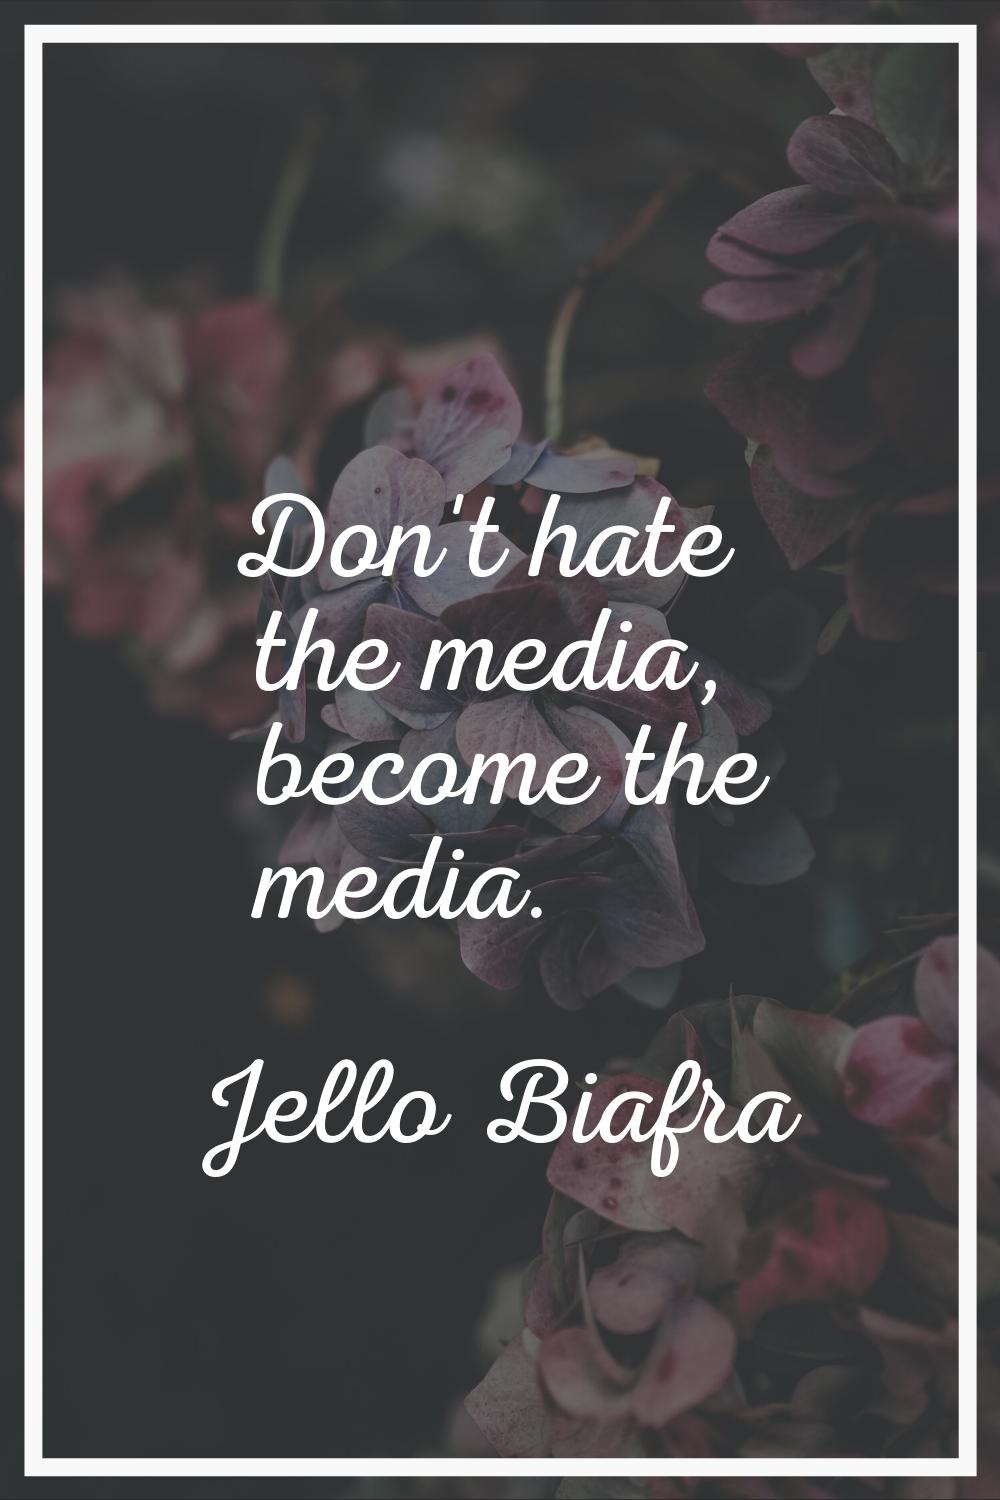 Don't hate the media, become the media.